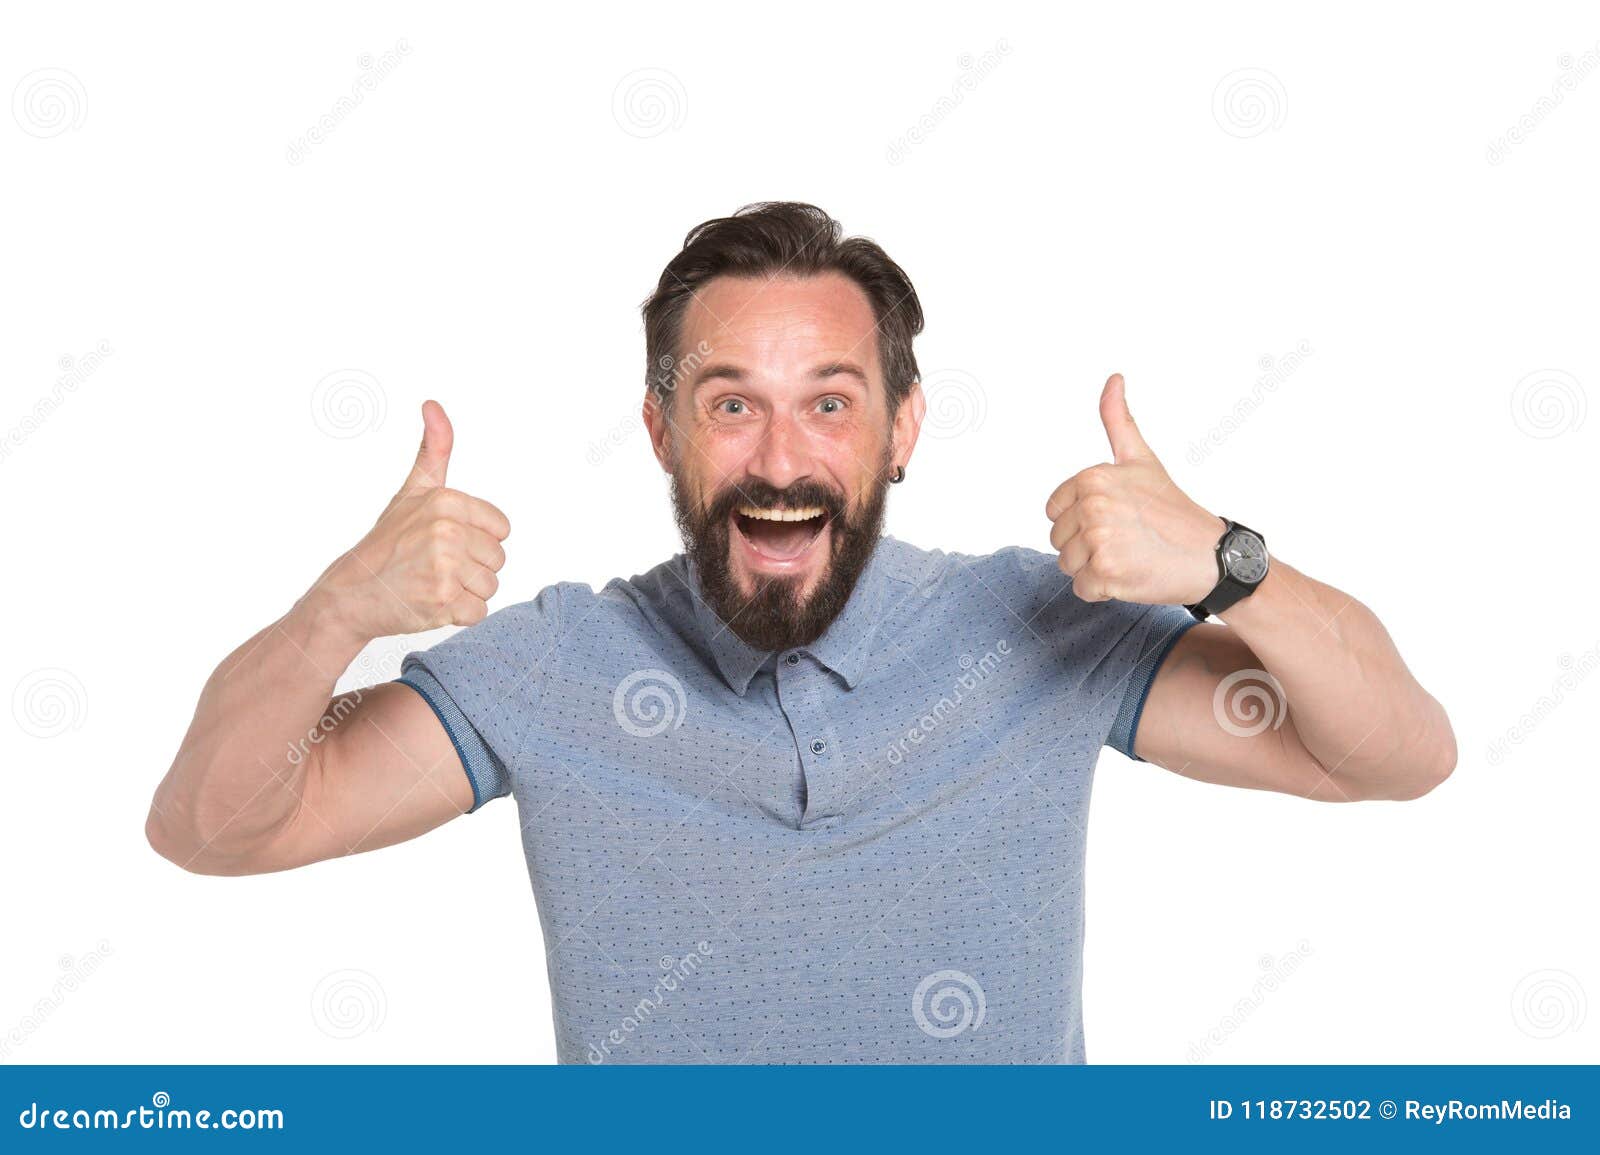 two thumbs up by both hands. emotional man with two thumbs up  on white background. excited bearded guy happy face emotion